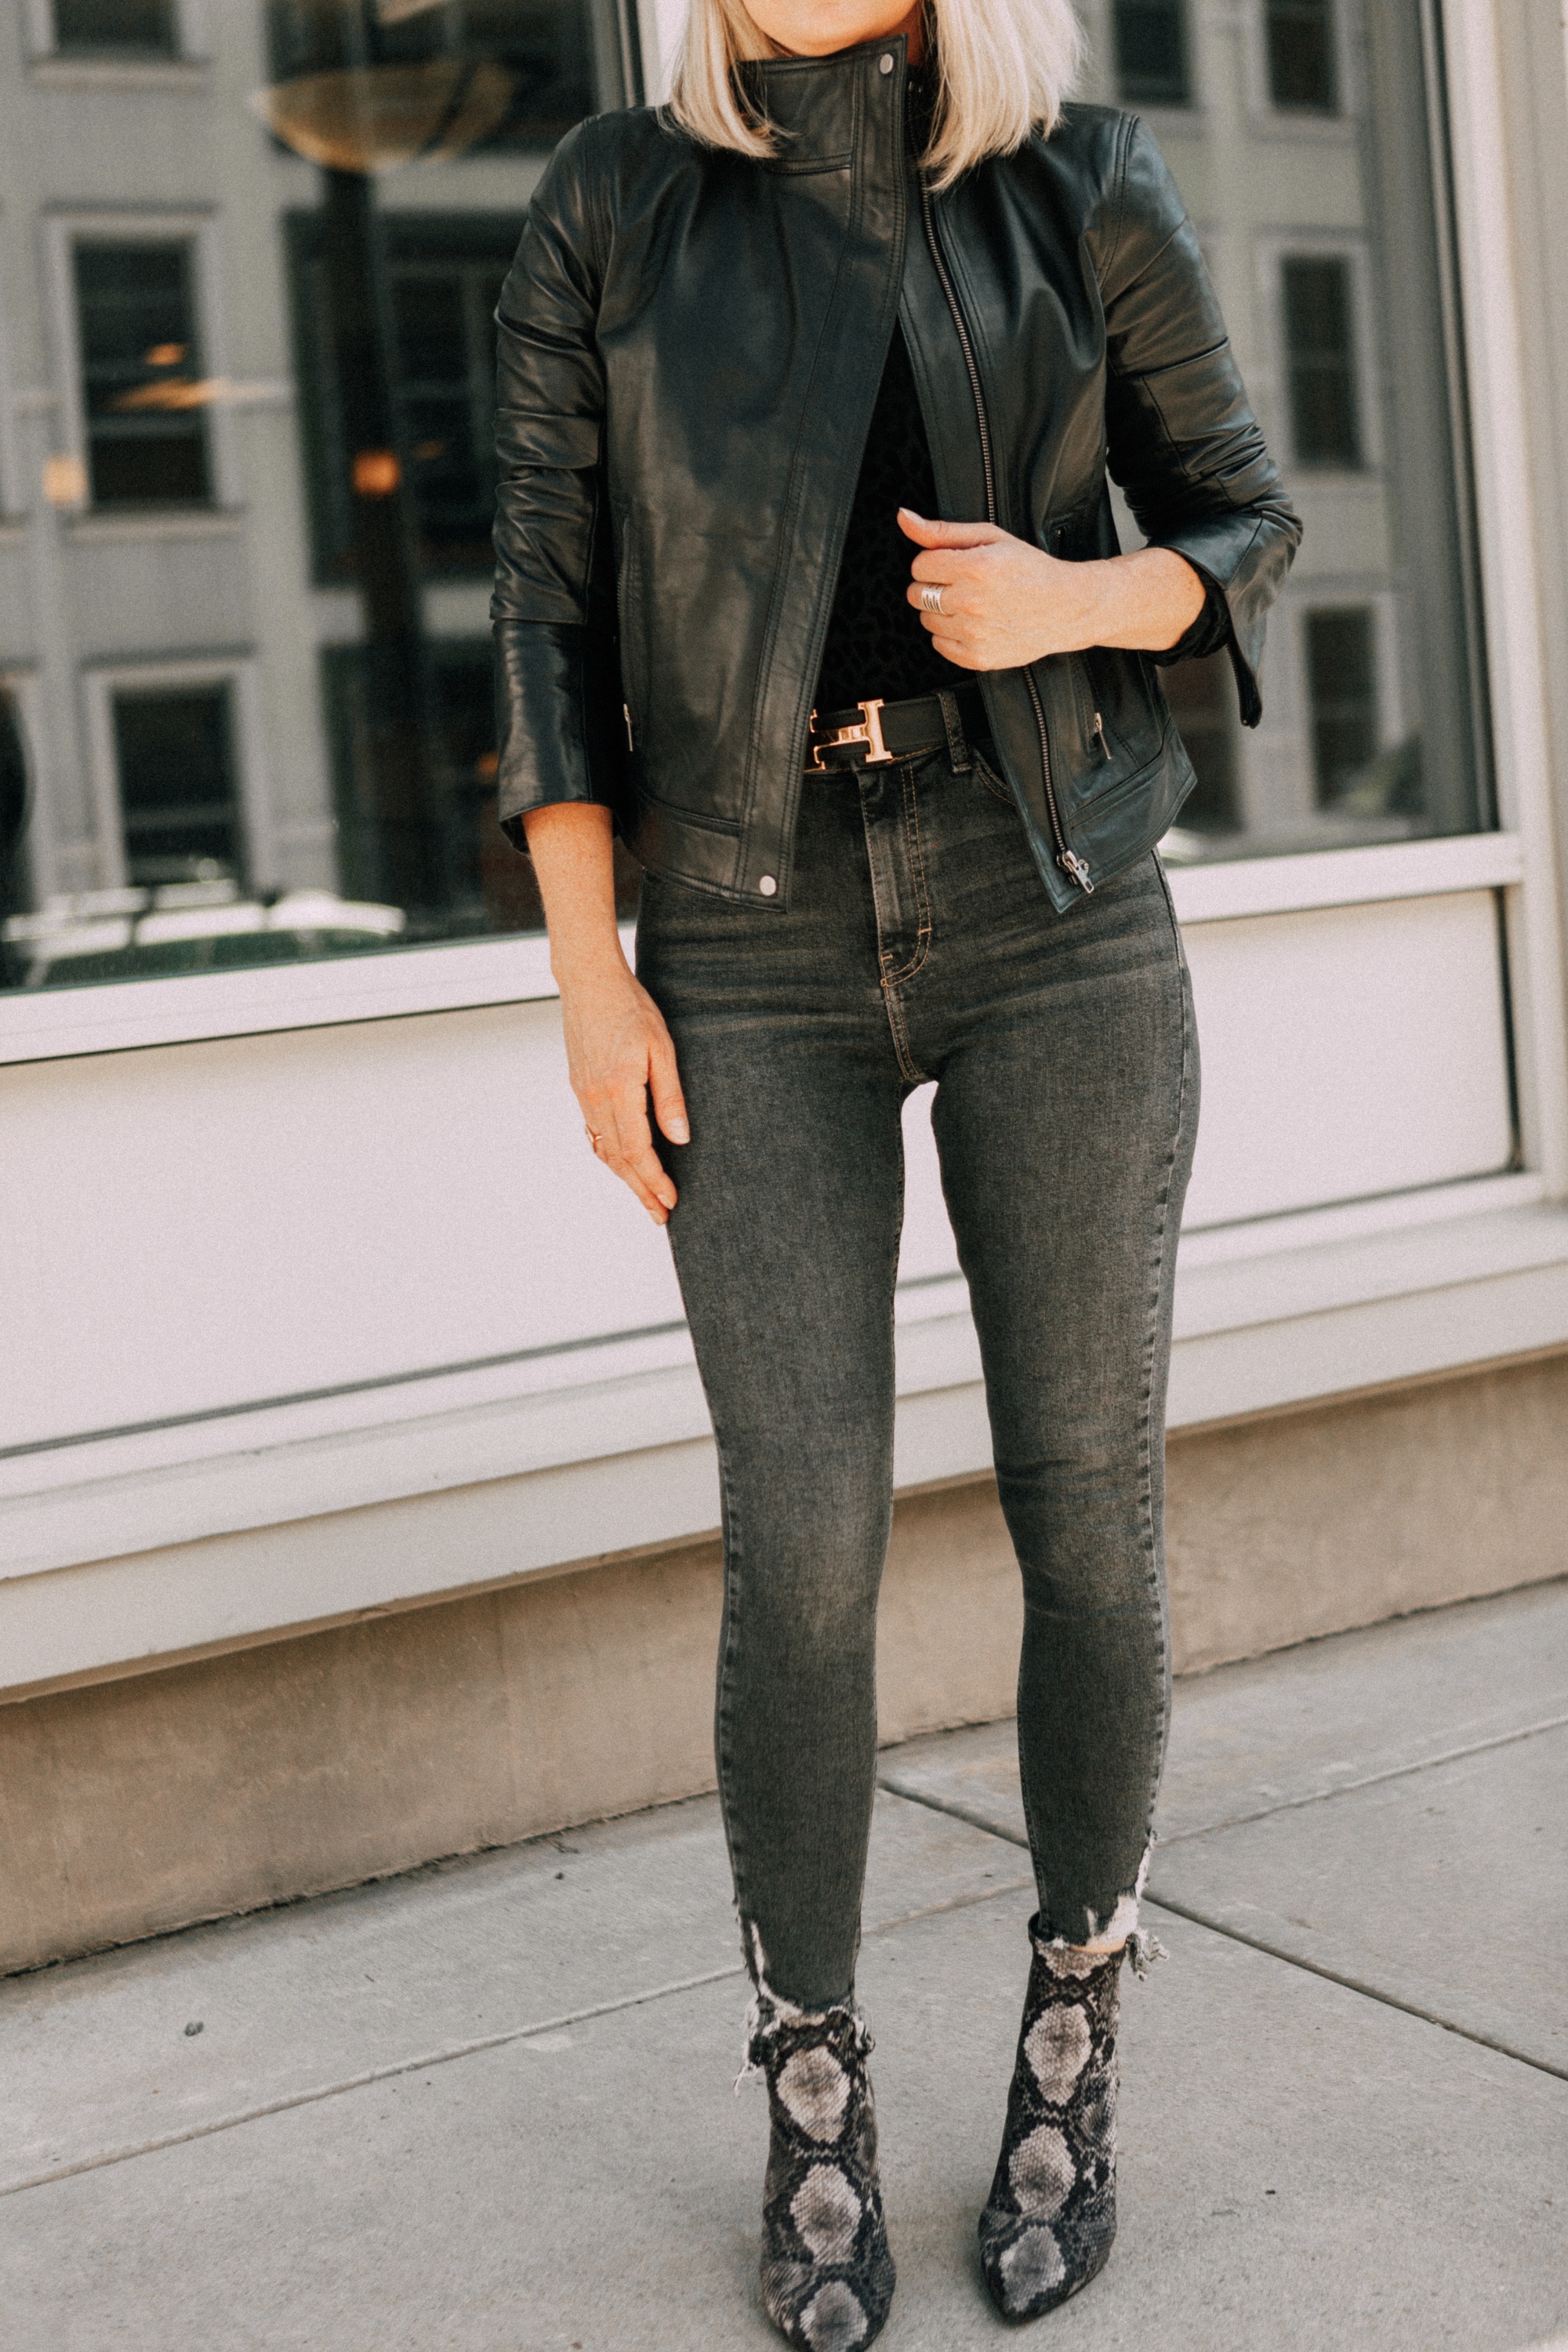 Leather Moto Jacket, Fashion blogger over 40 Erin Busbee of BusbeeStyle.com featuring the Chelsea28 black leather jacket from the Nordstrom Anniversary Sale 2019 styled with the velvet leopard bodysuit, Topshop jeans, and Charles Davidson python print booties from Nordstrom in Telluride, Colorado